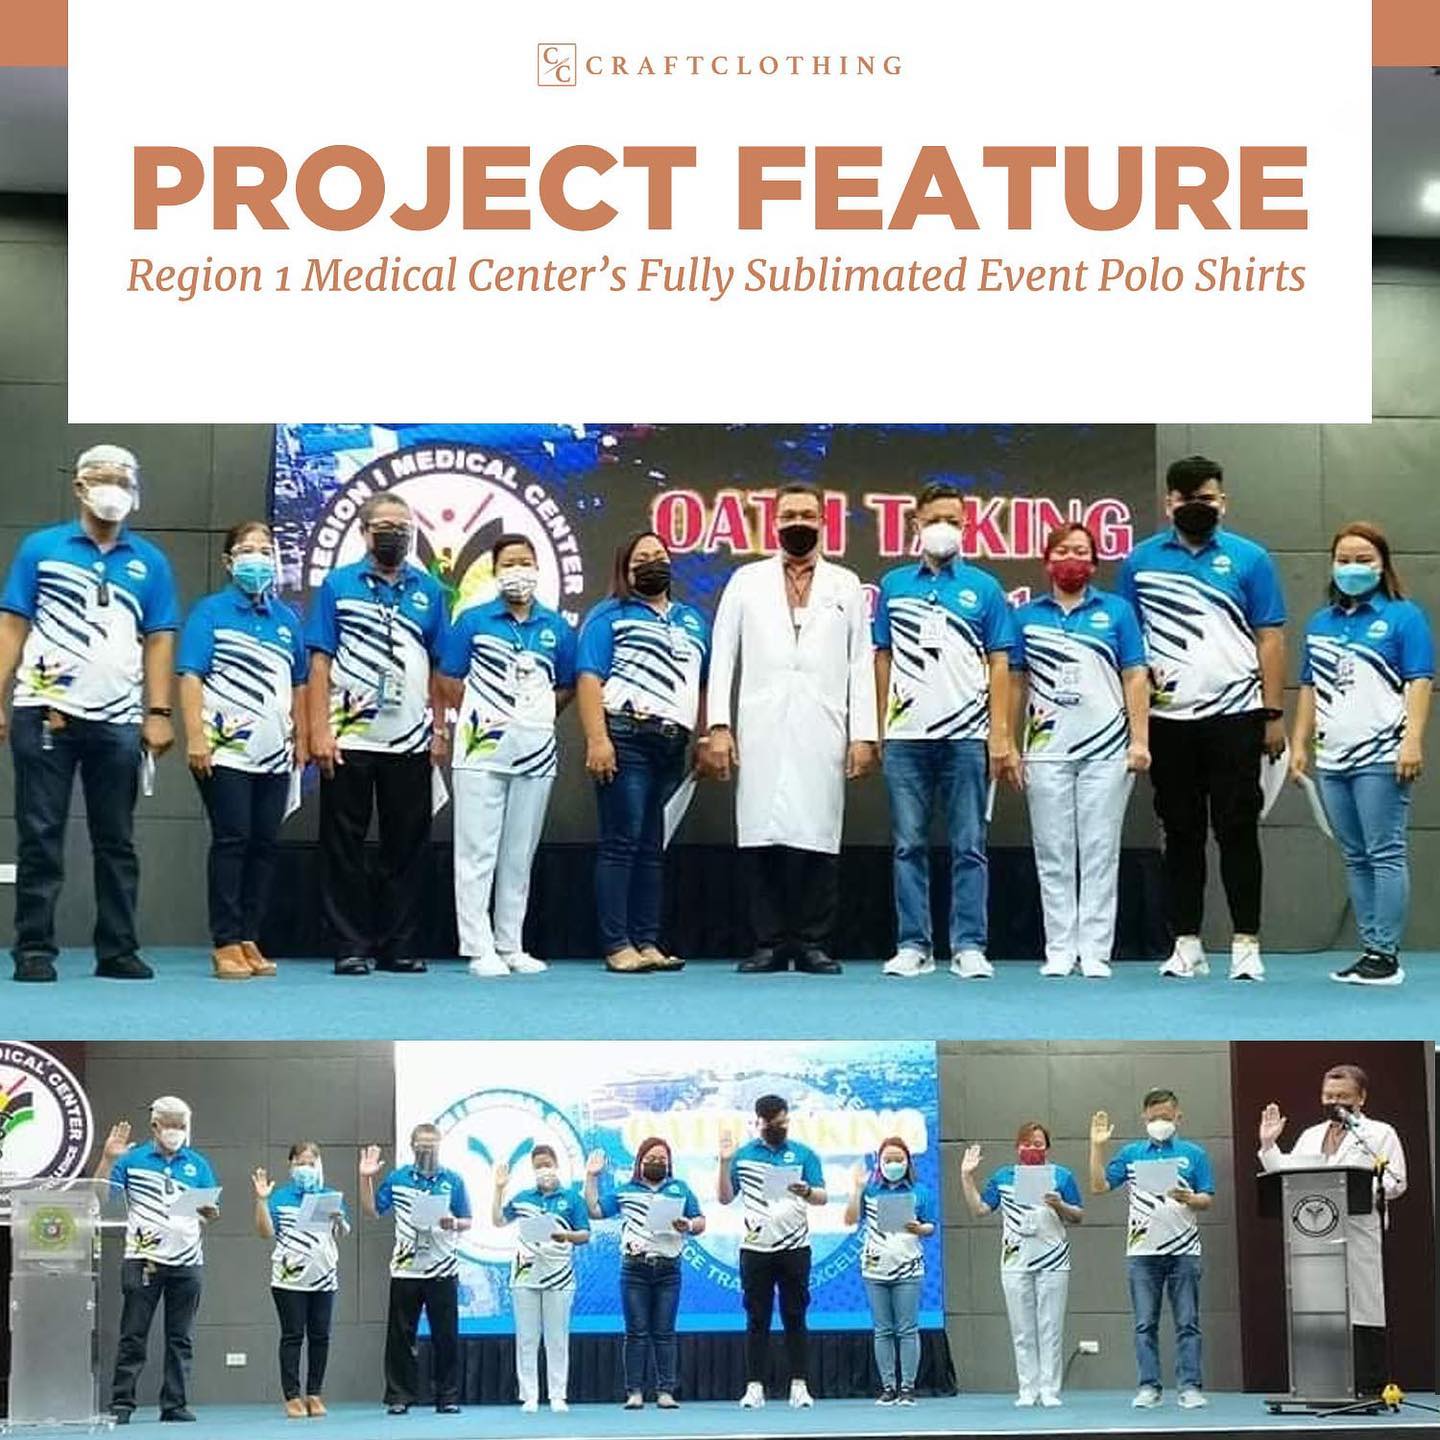 Project Feature: Region 1 Medical Center’s Event Polo Shirts